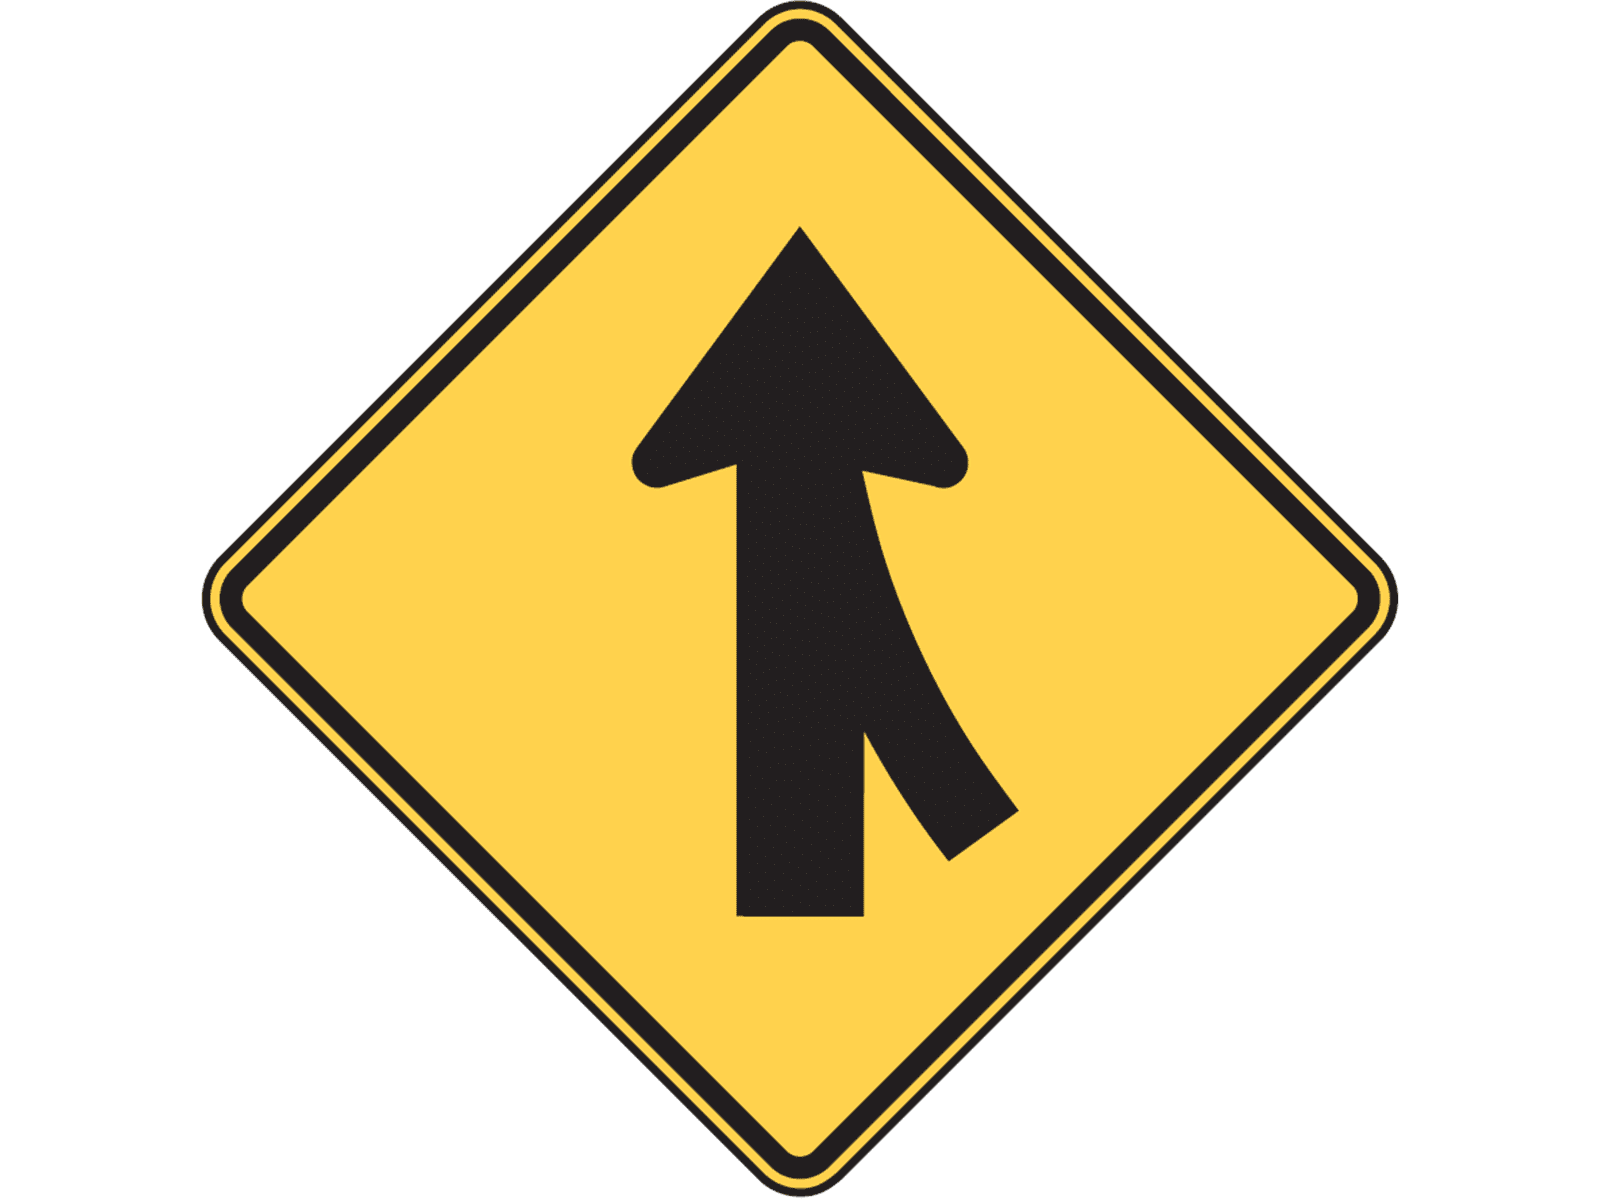 Merge W4-1 - W4: Lanes and Merges